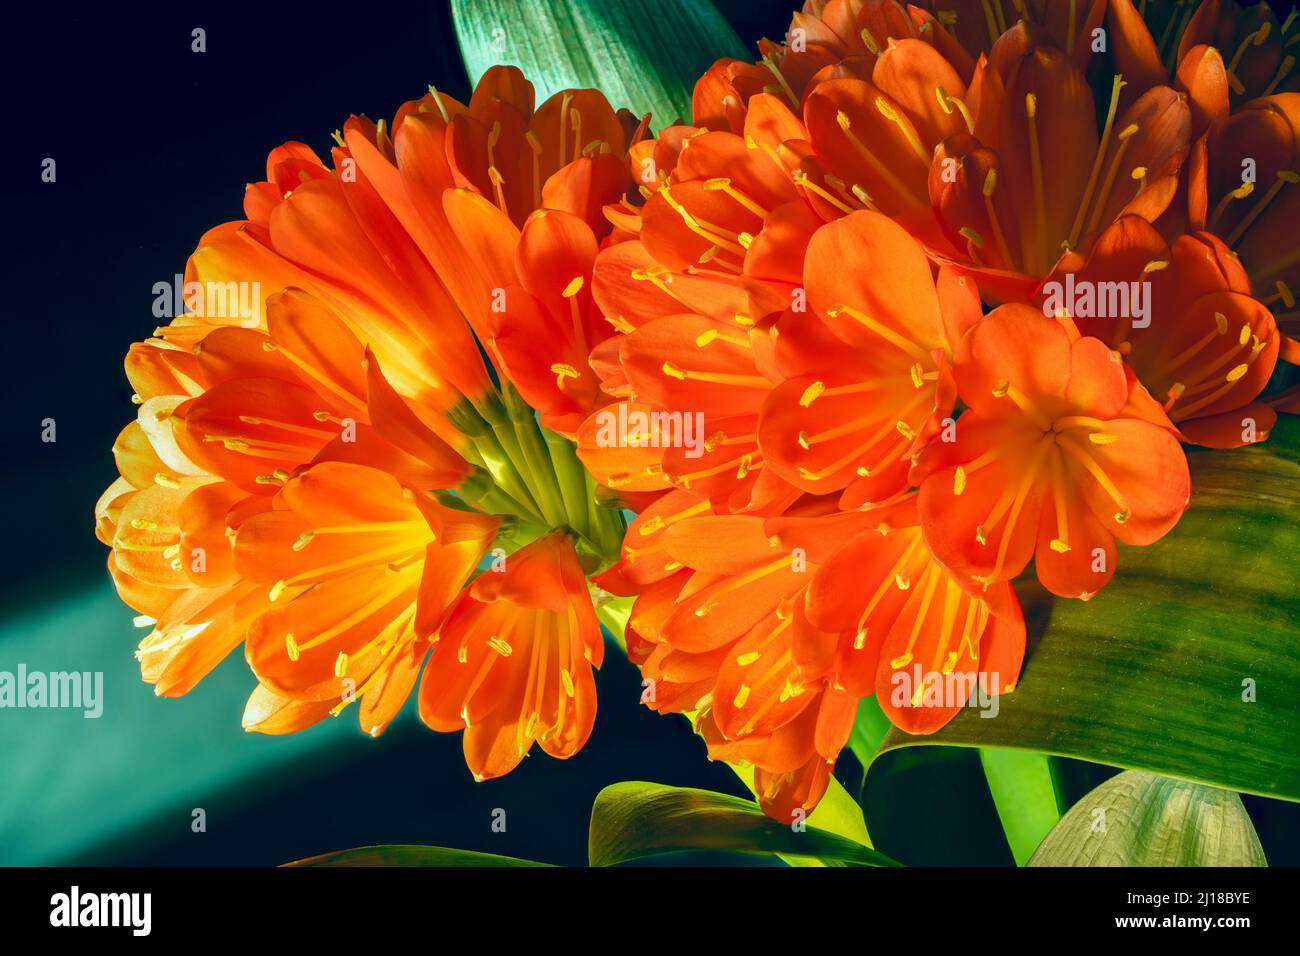 Sunlit Clivia Miniata bloom with bright orange petals and yellow stamens arranged in a cluster. Stock Photo